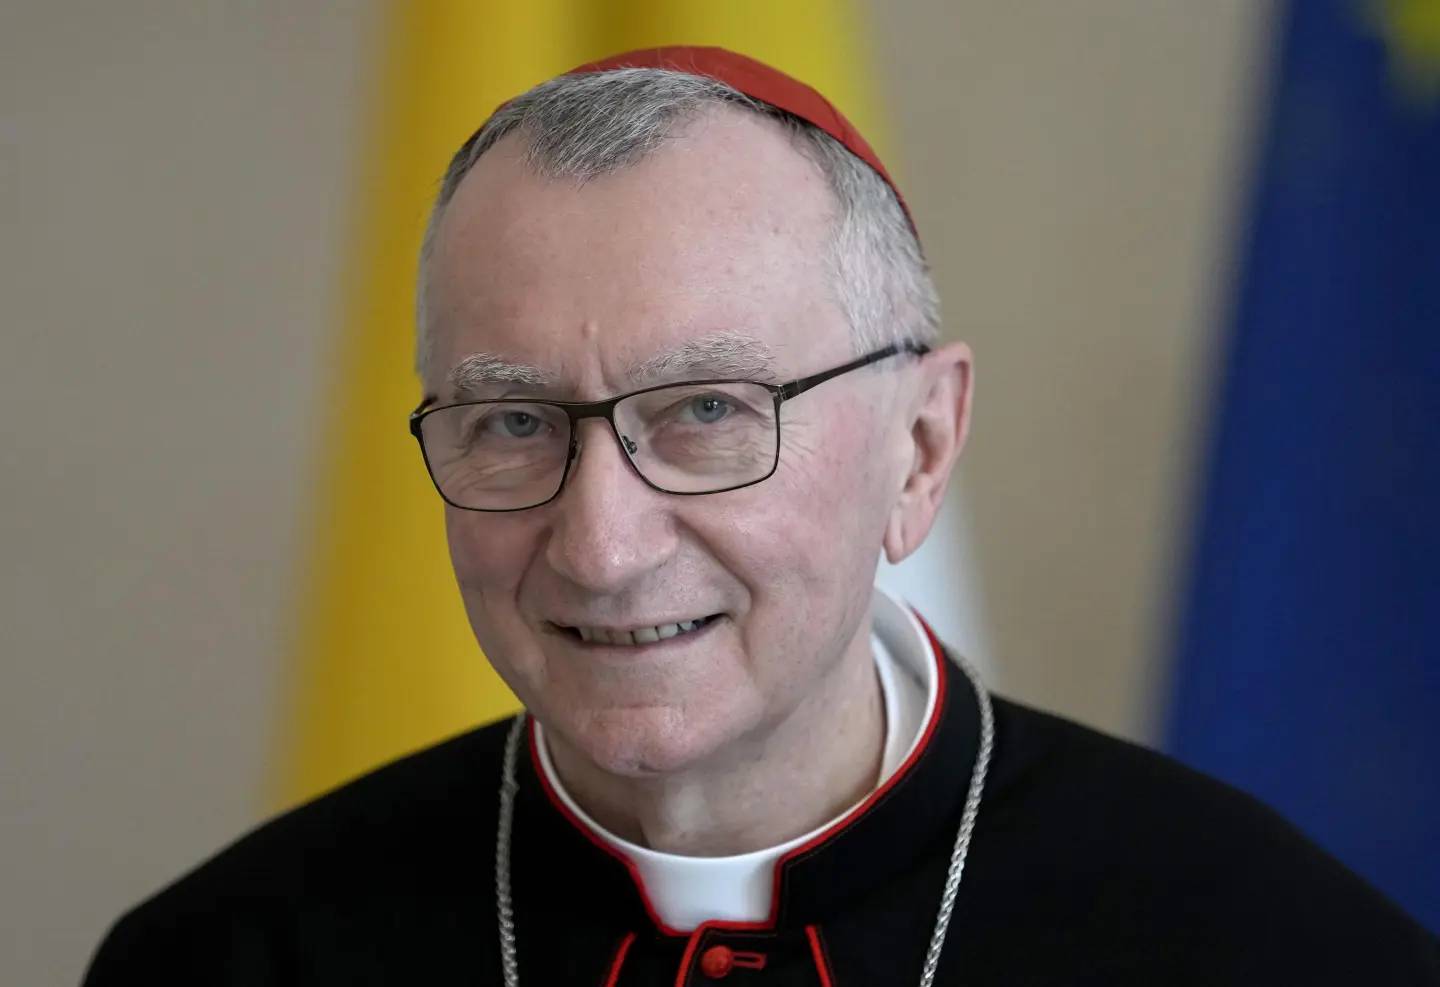 Vatican Secretary of State Cardinal Pietro Parolin smiles during a meeting at the Bellevue palace in Berlin, Germany on June 29, 2021. (Credit: AP Photo/Michael Sohn.)